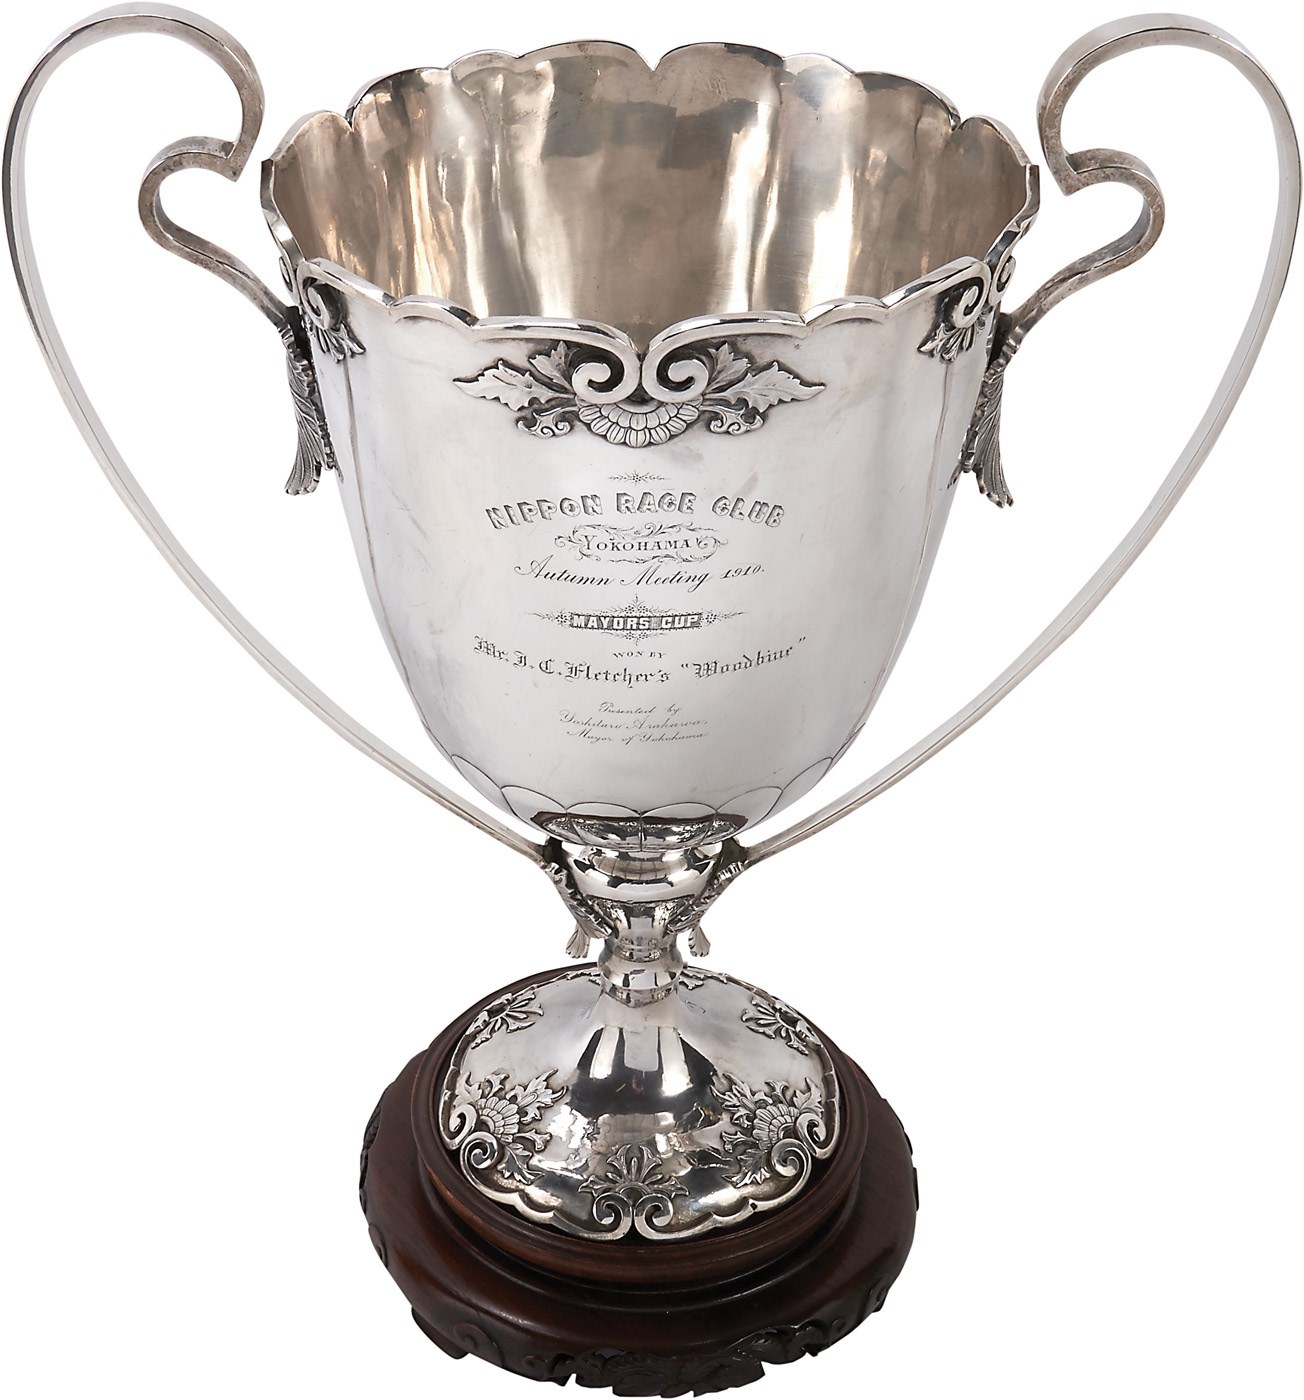 - Incredible 1910 "Mayor's Cup" - Japanese Silver Trophy Presented to "Woodbine"